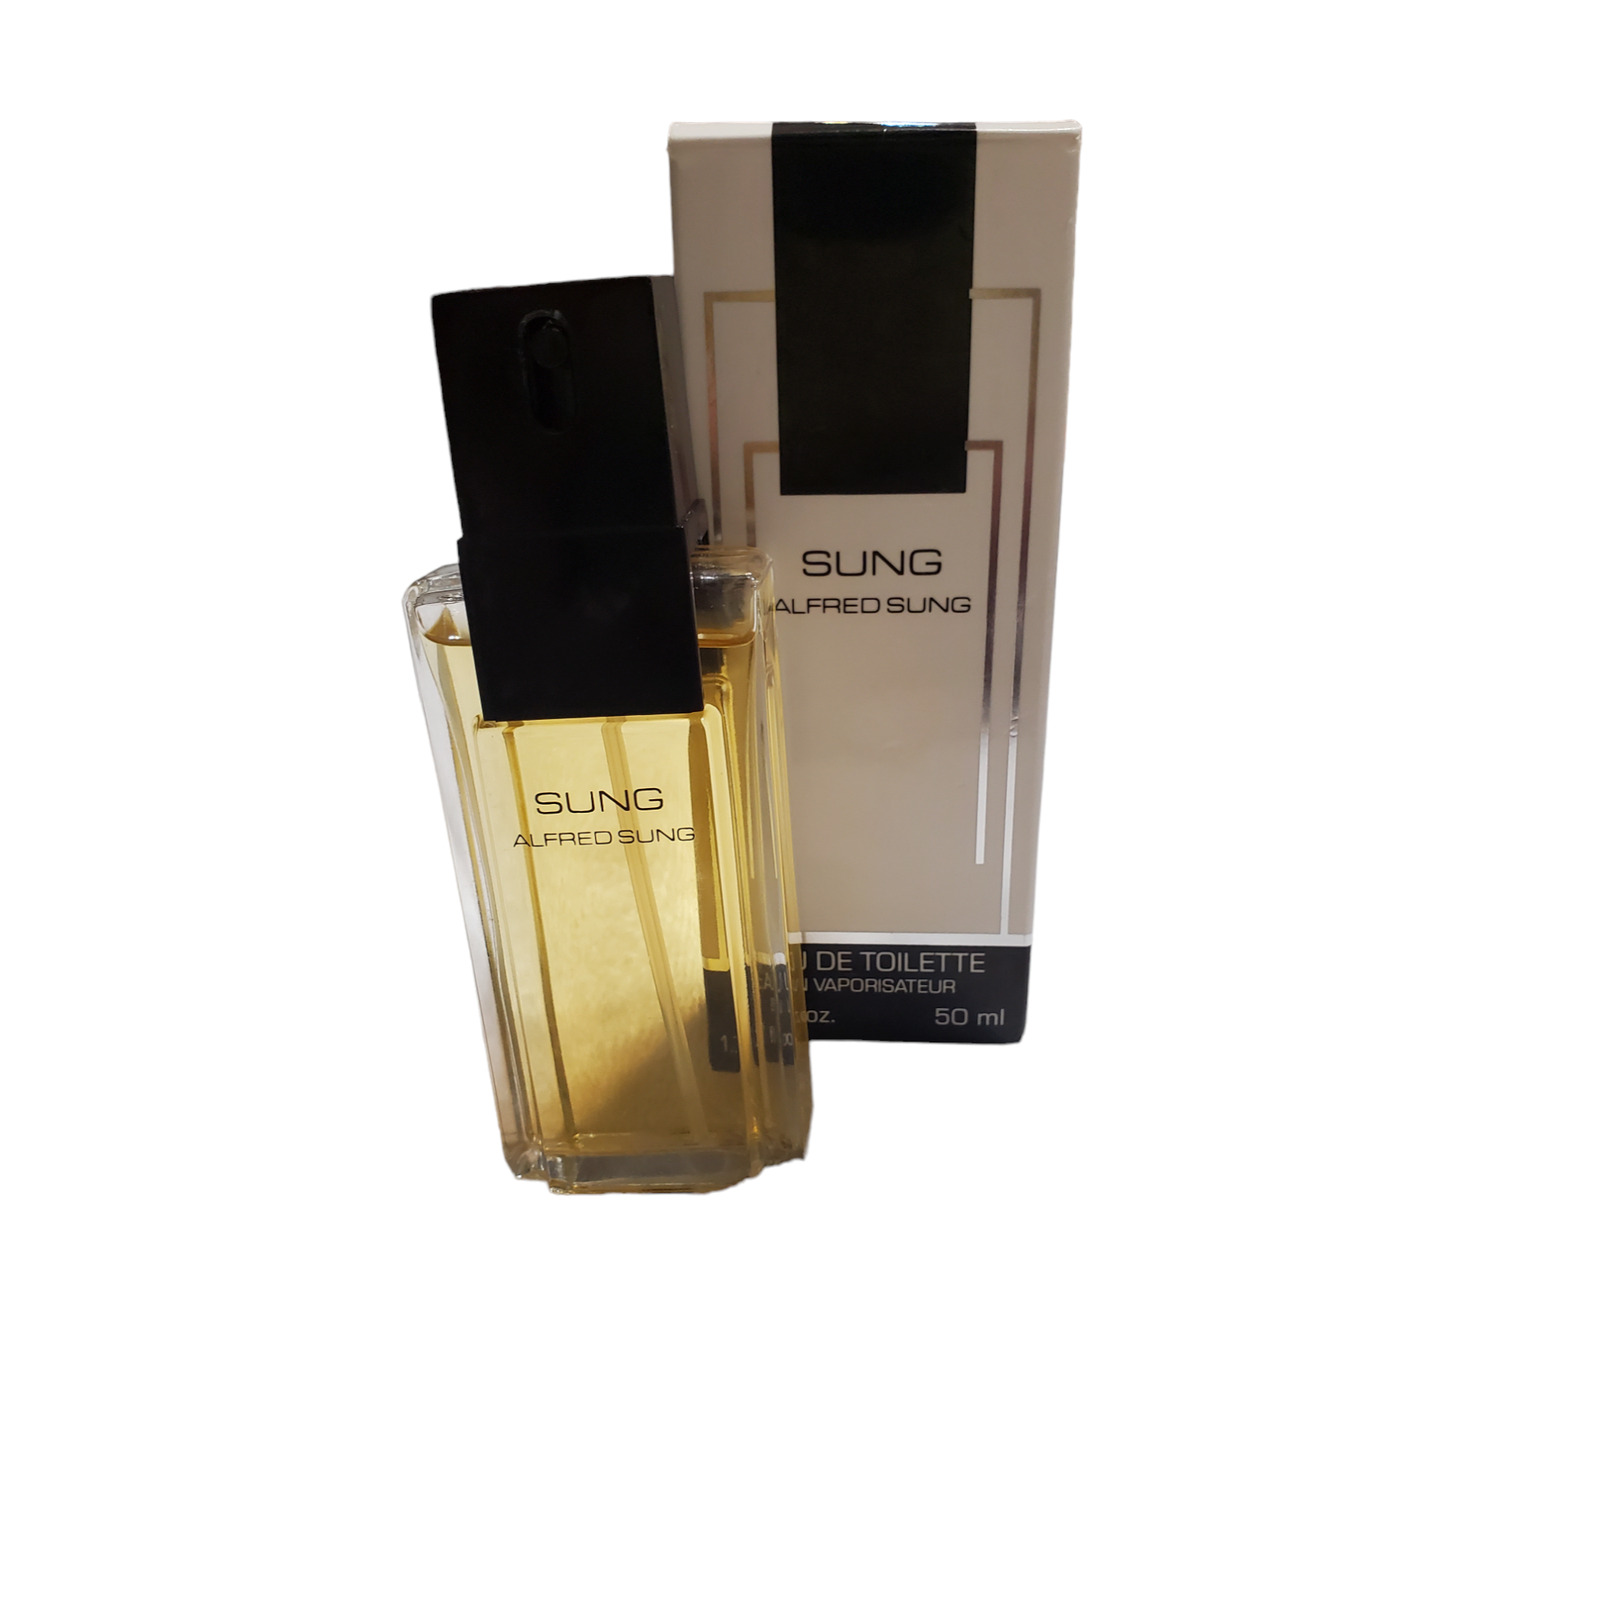 Sung By Alfred Sung Perfume EDT Spray for Women 1.7oz/50ml new with box